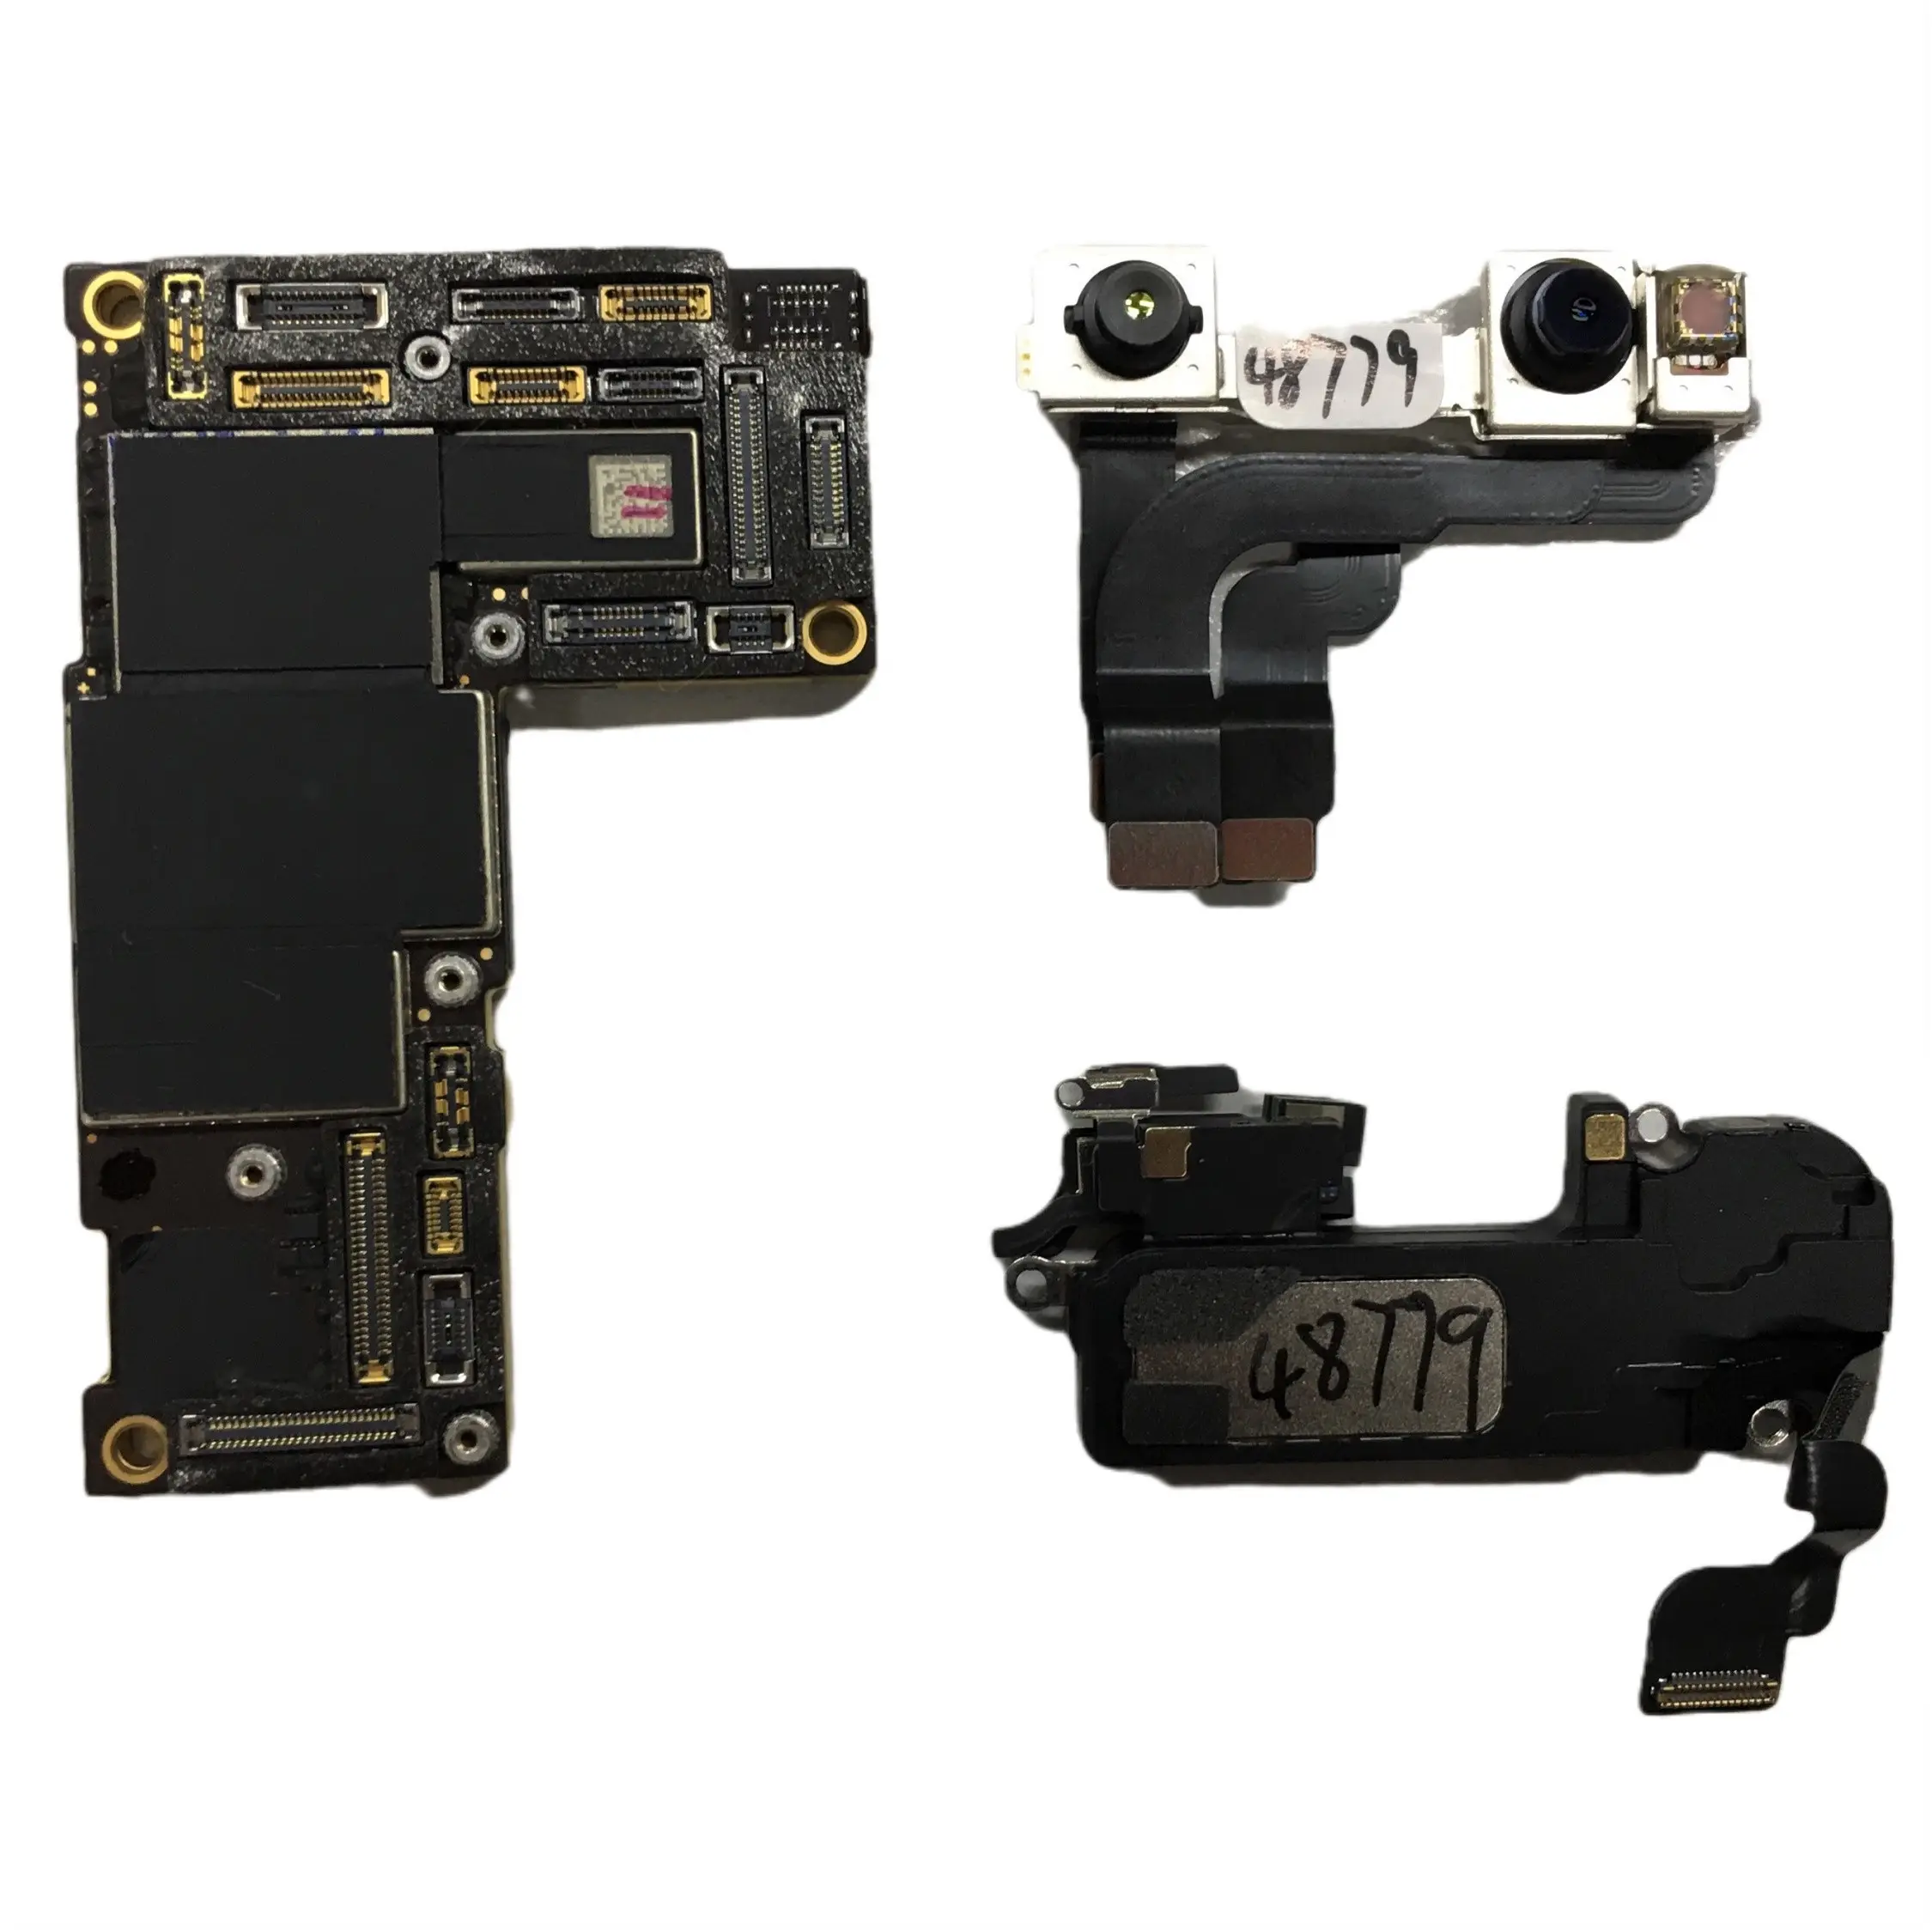 Original unlocked For iPhone 12 motherboard, logic board with face ID For iPhone 12 mini /12 Pro/ Max motherboard